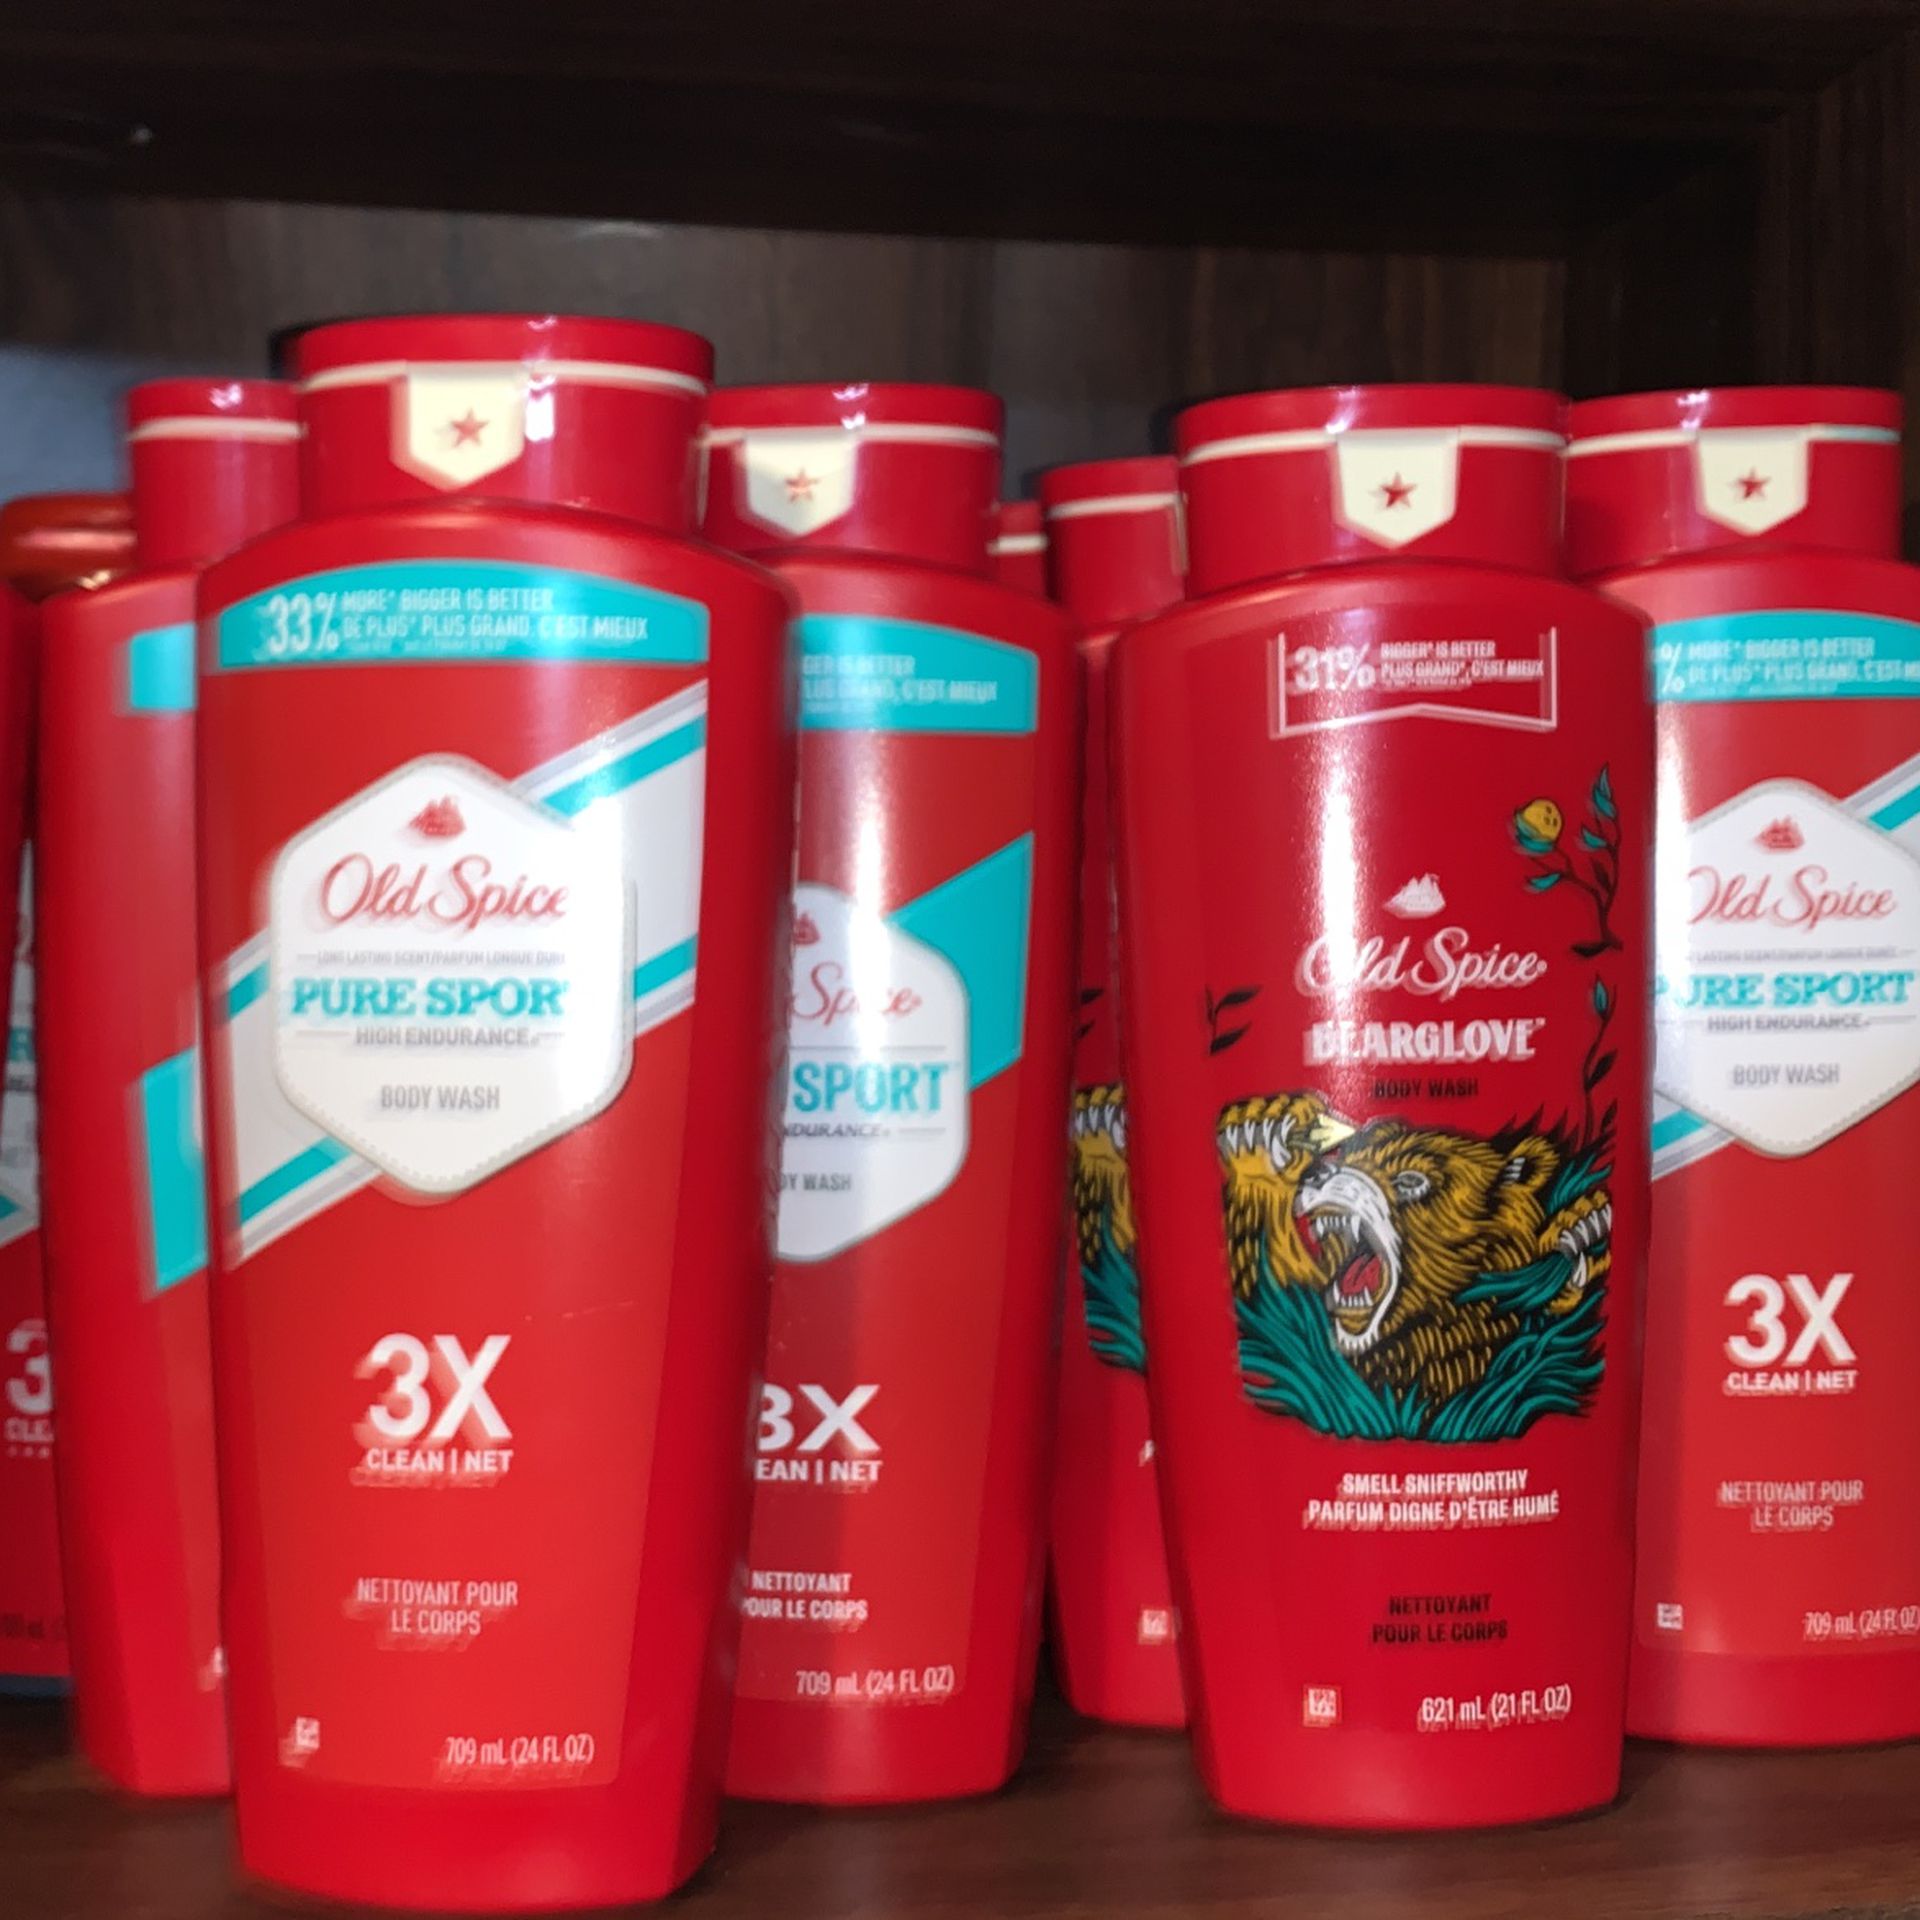 Old Spice Body Wash 5 For 20 or 4$ Each